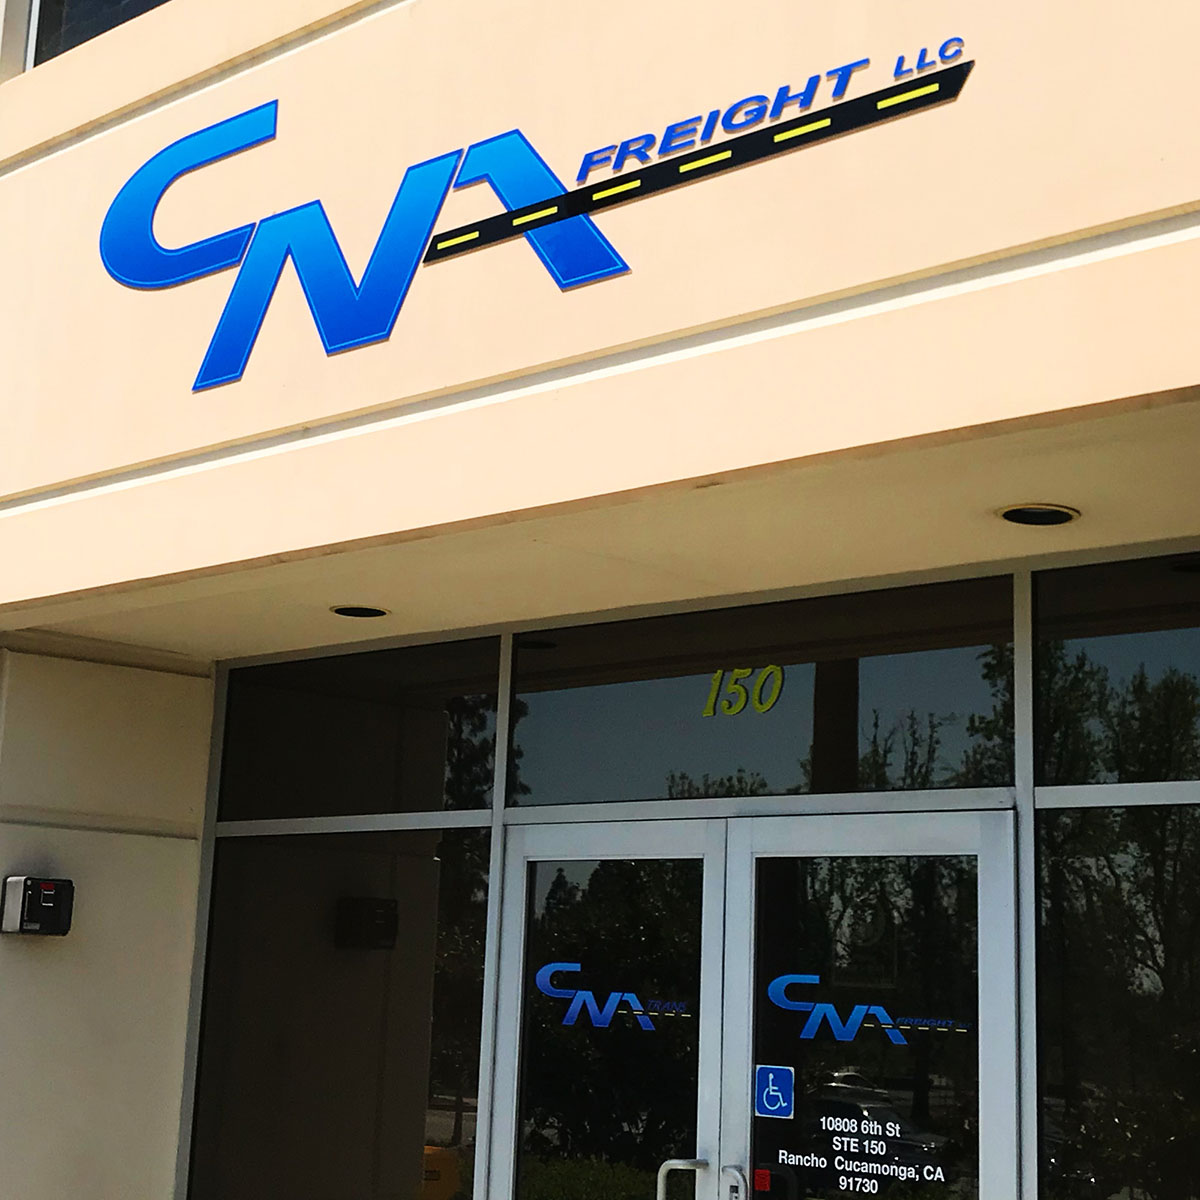 CNA Freight Building and Window Signage